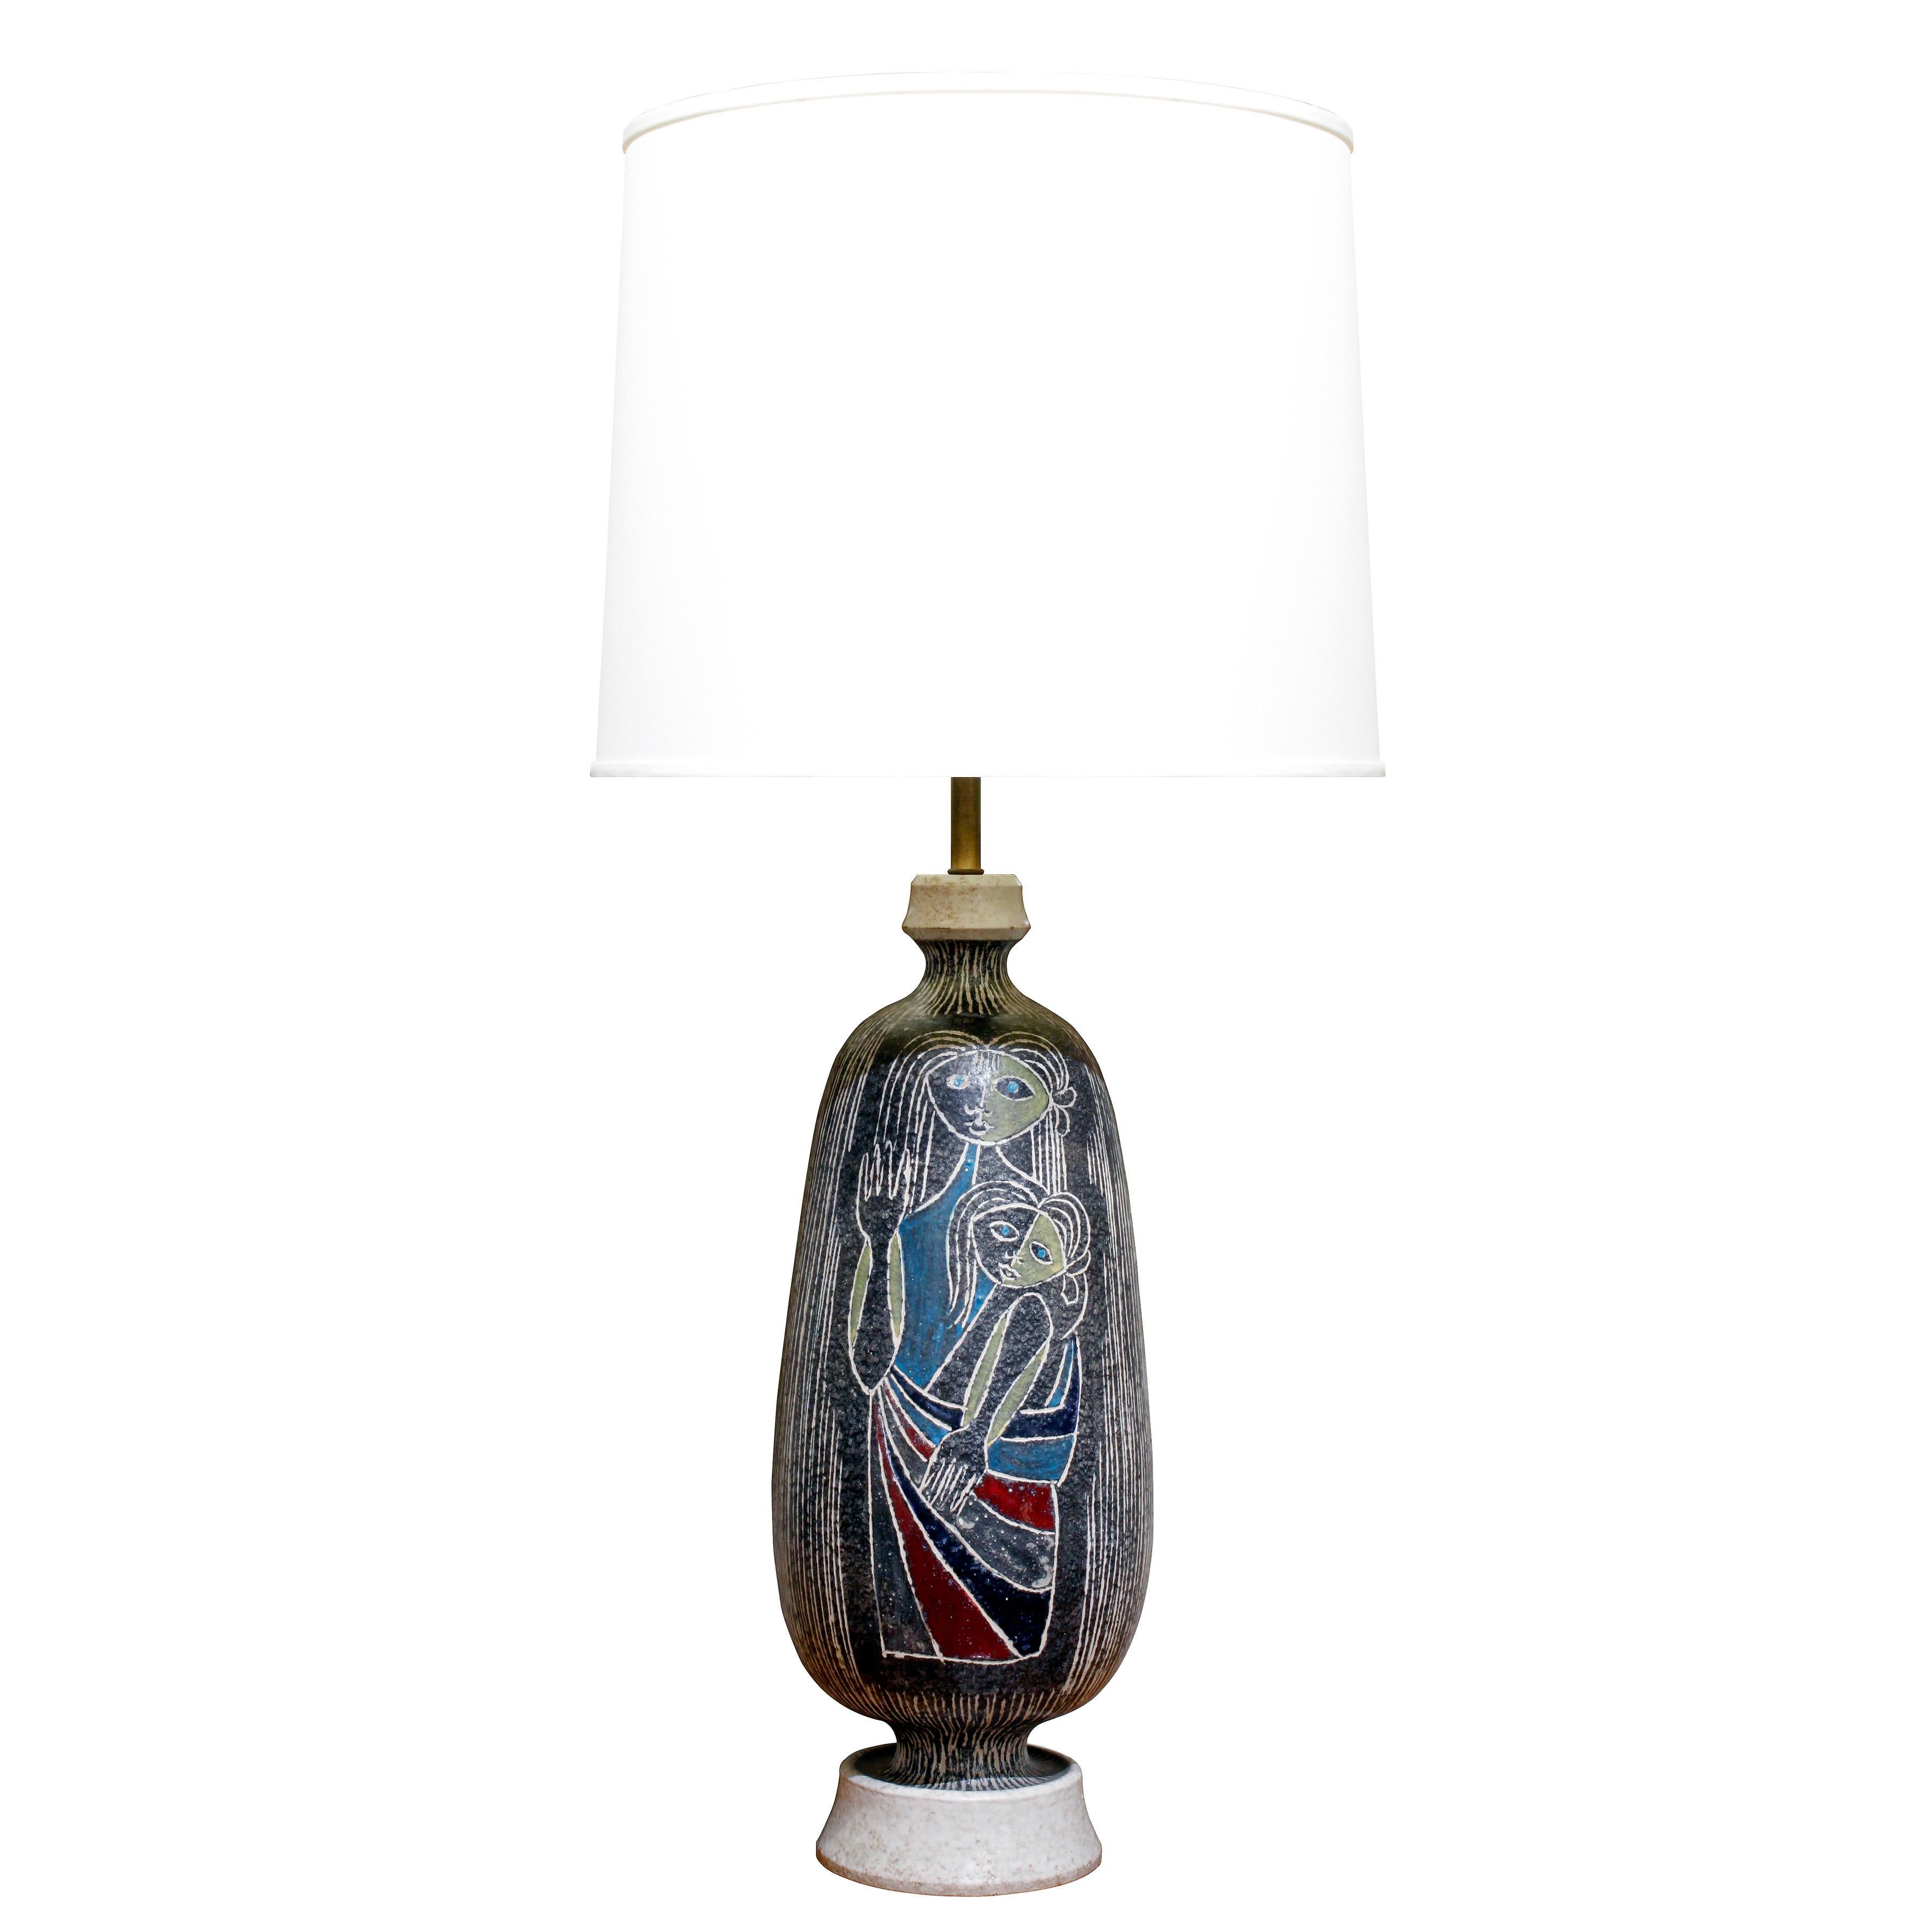 Large hand-thrown ceramic table lamp with figural decoration, Italian 1950’s (signed on bottom 